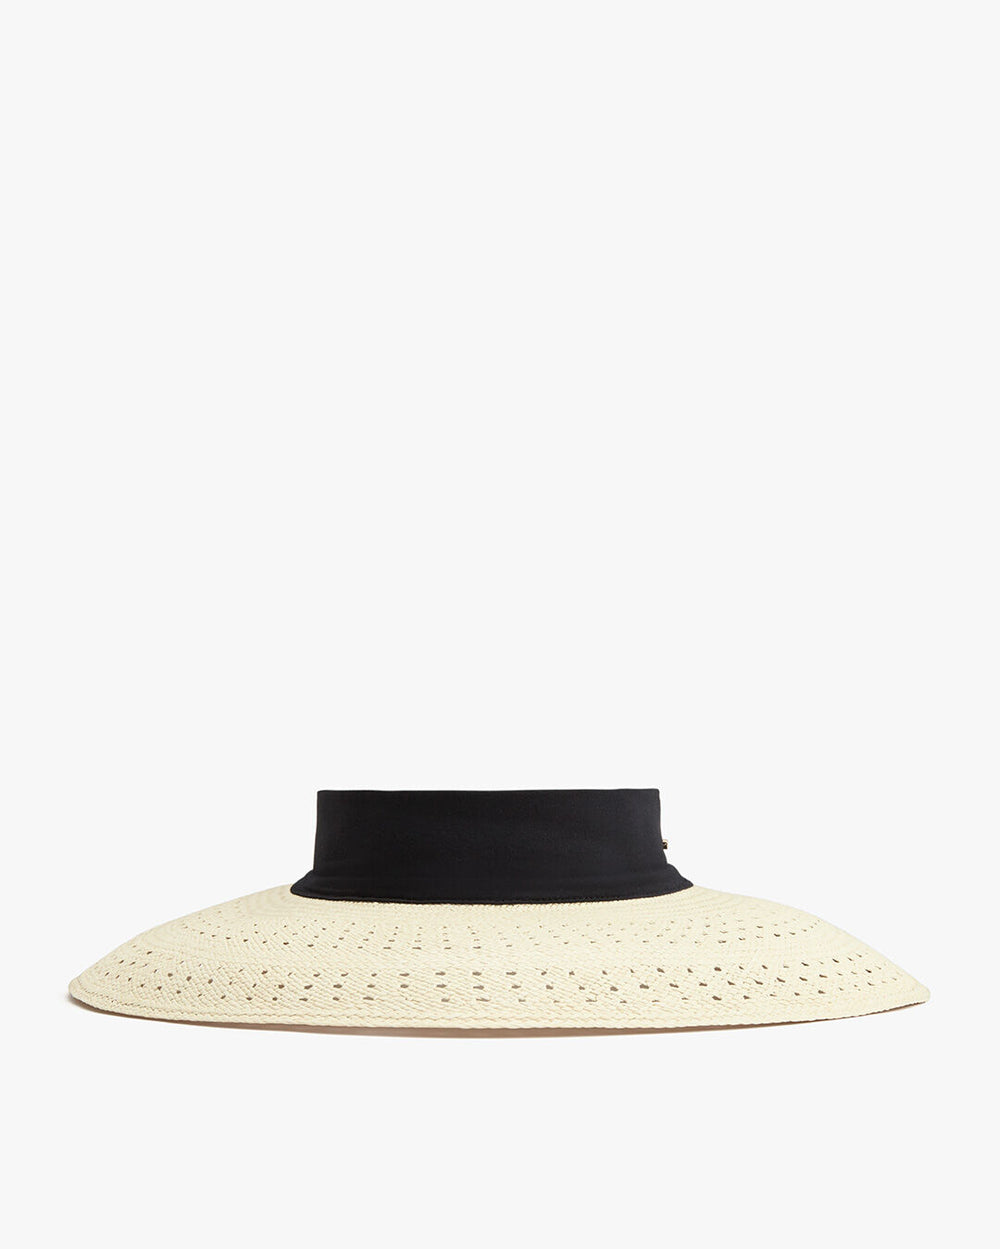 Wide-brimmed hat with a solid band around the base.